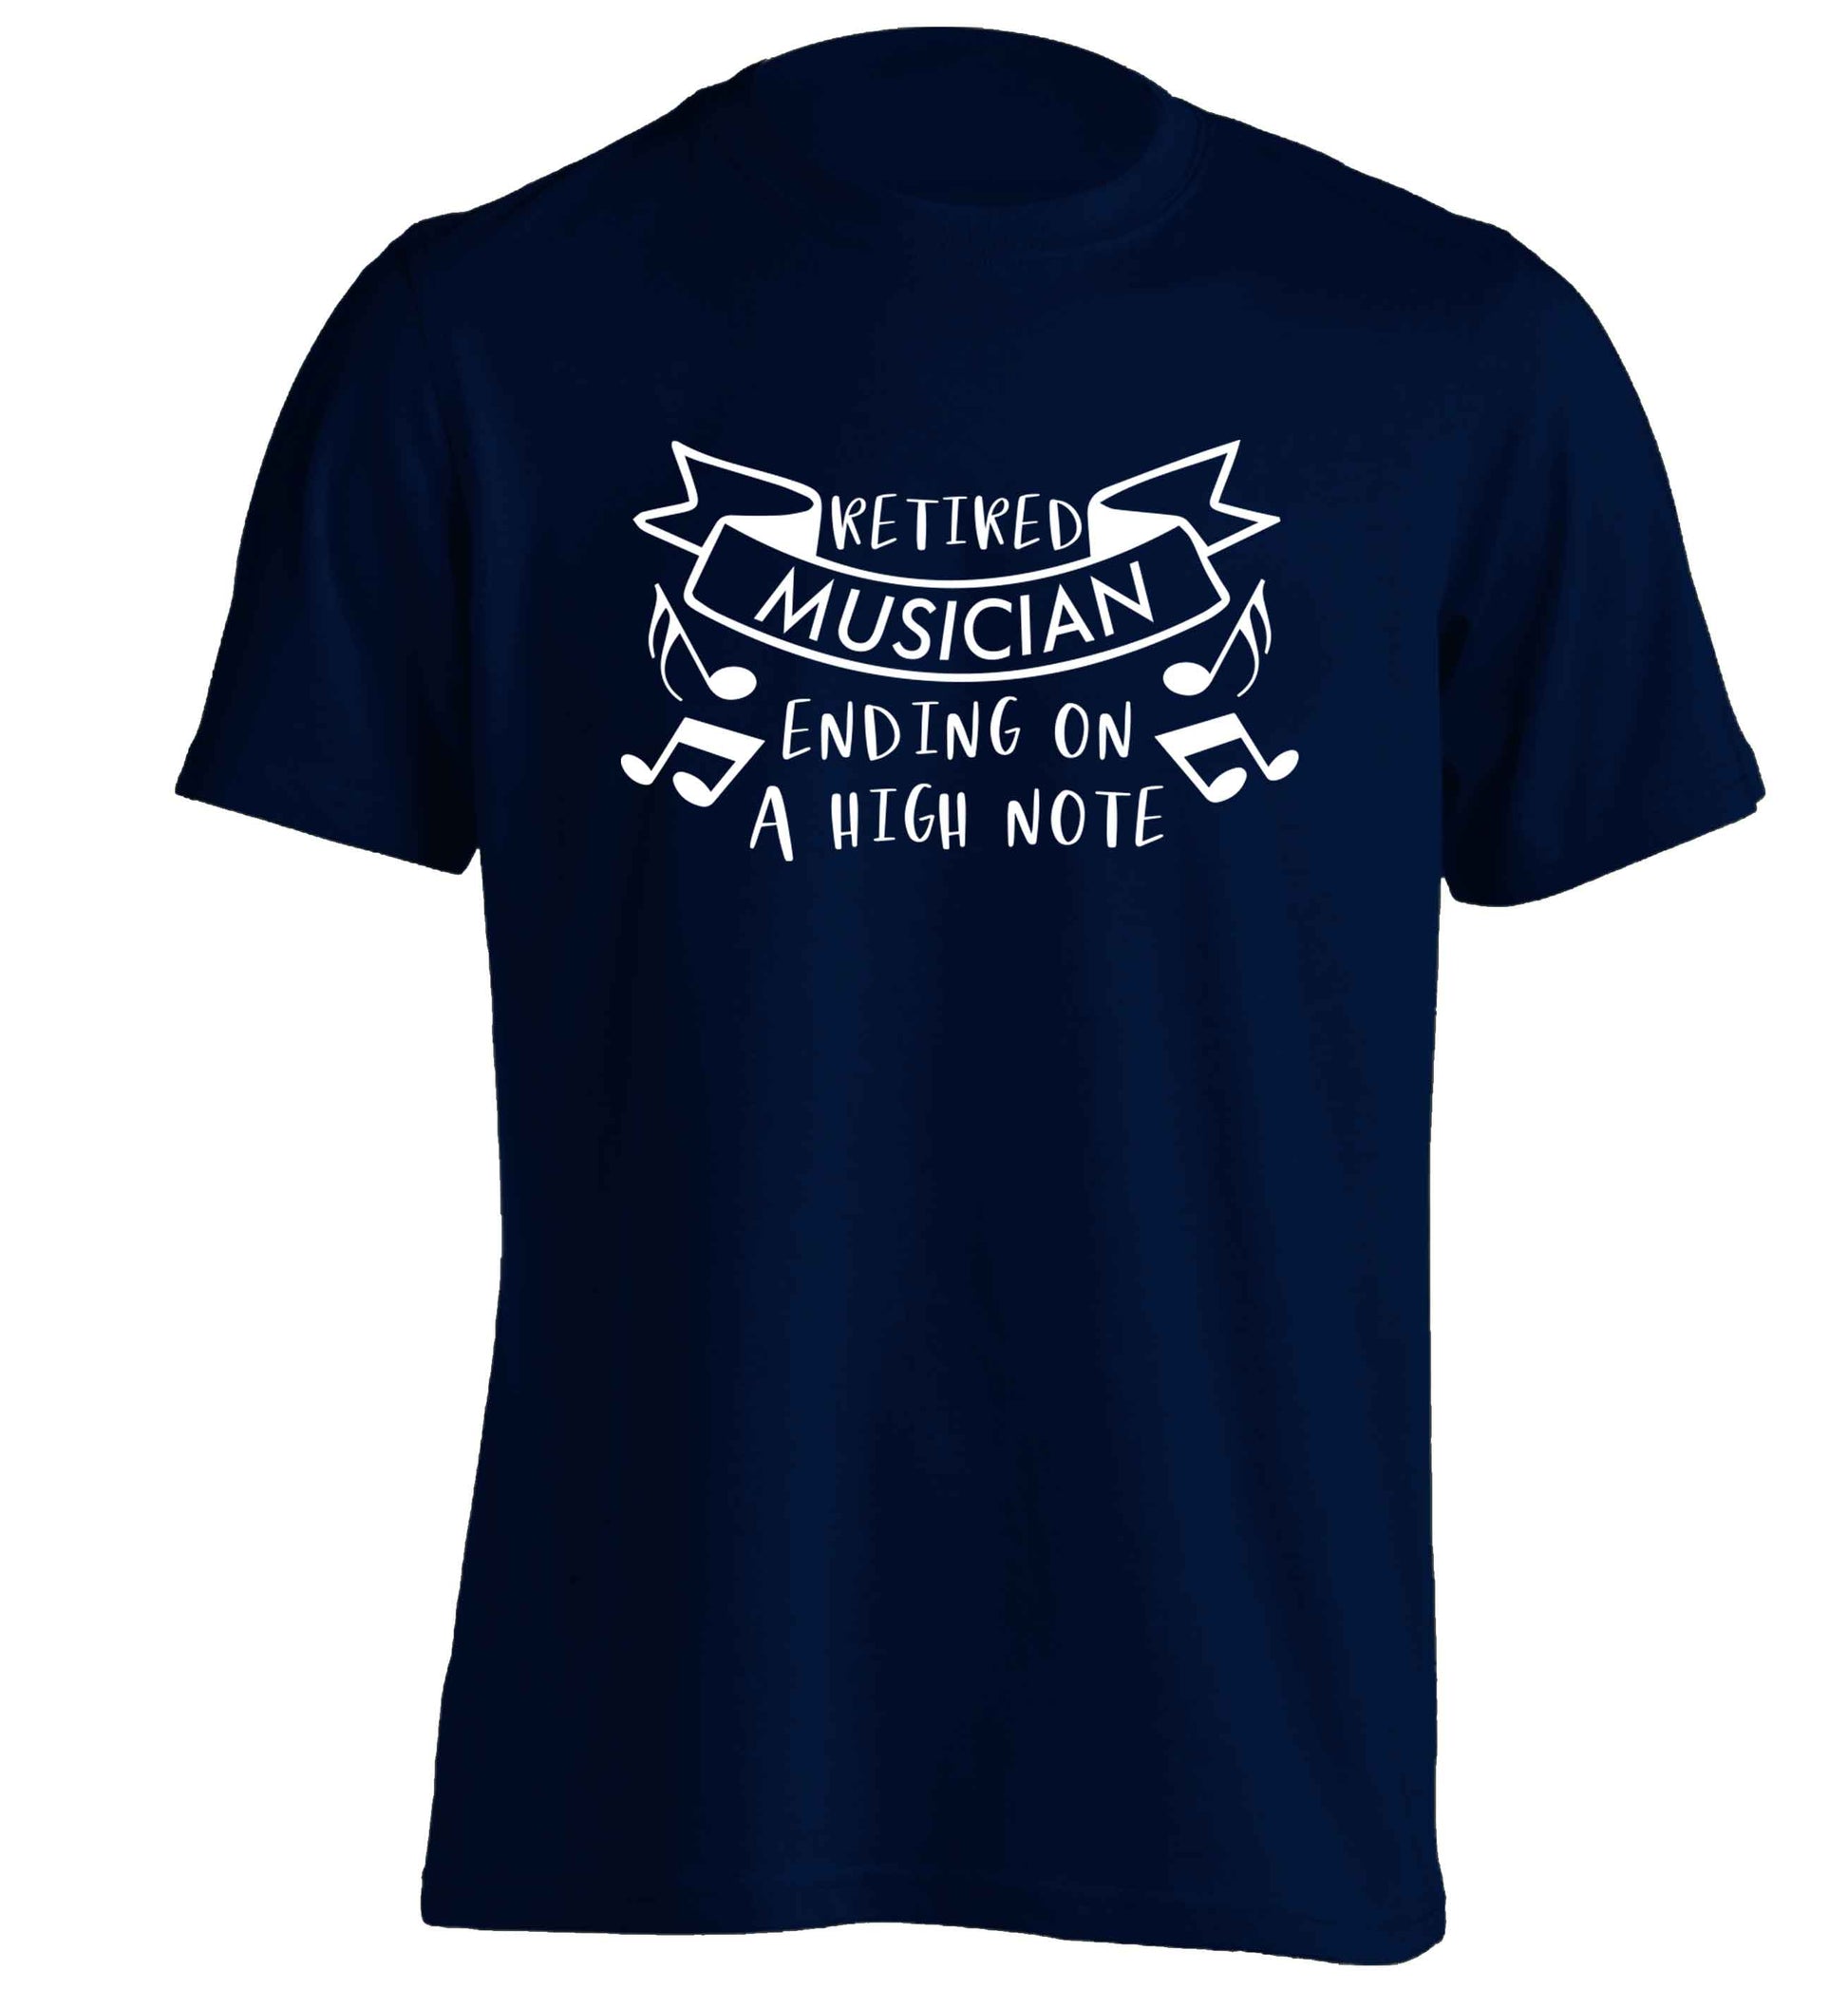 Retired musician ending on a high note adults unisex navy Tshirt 2XL